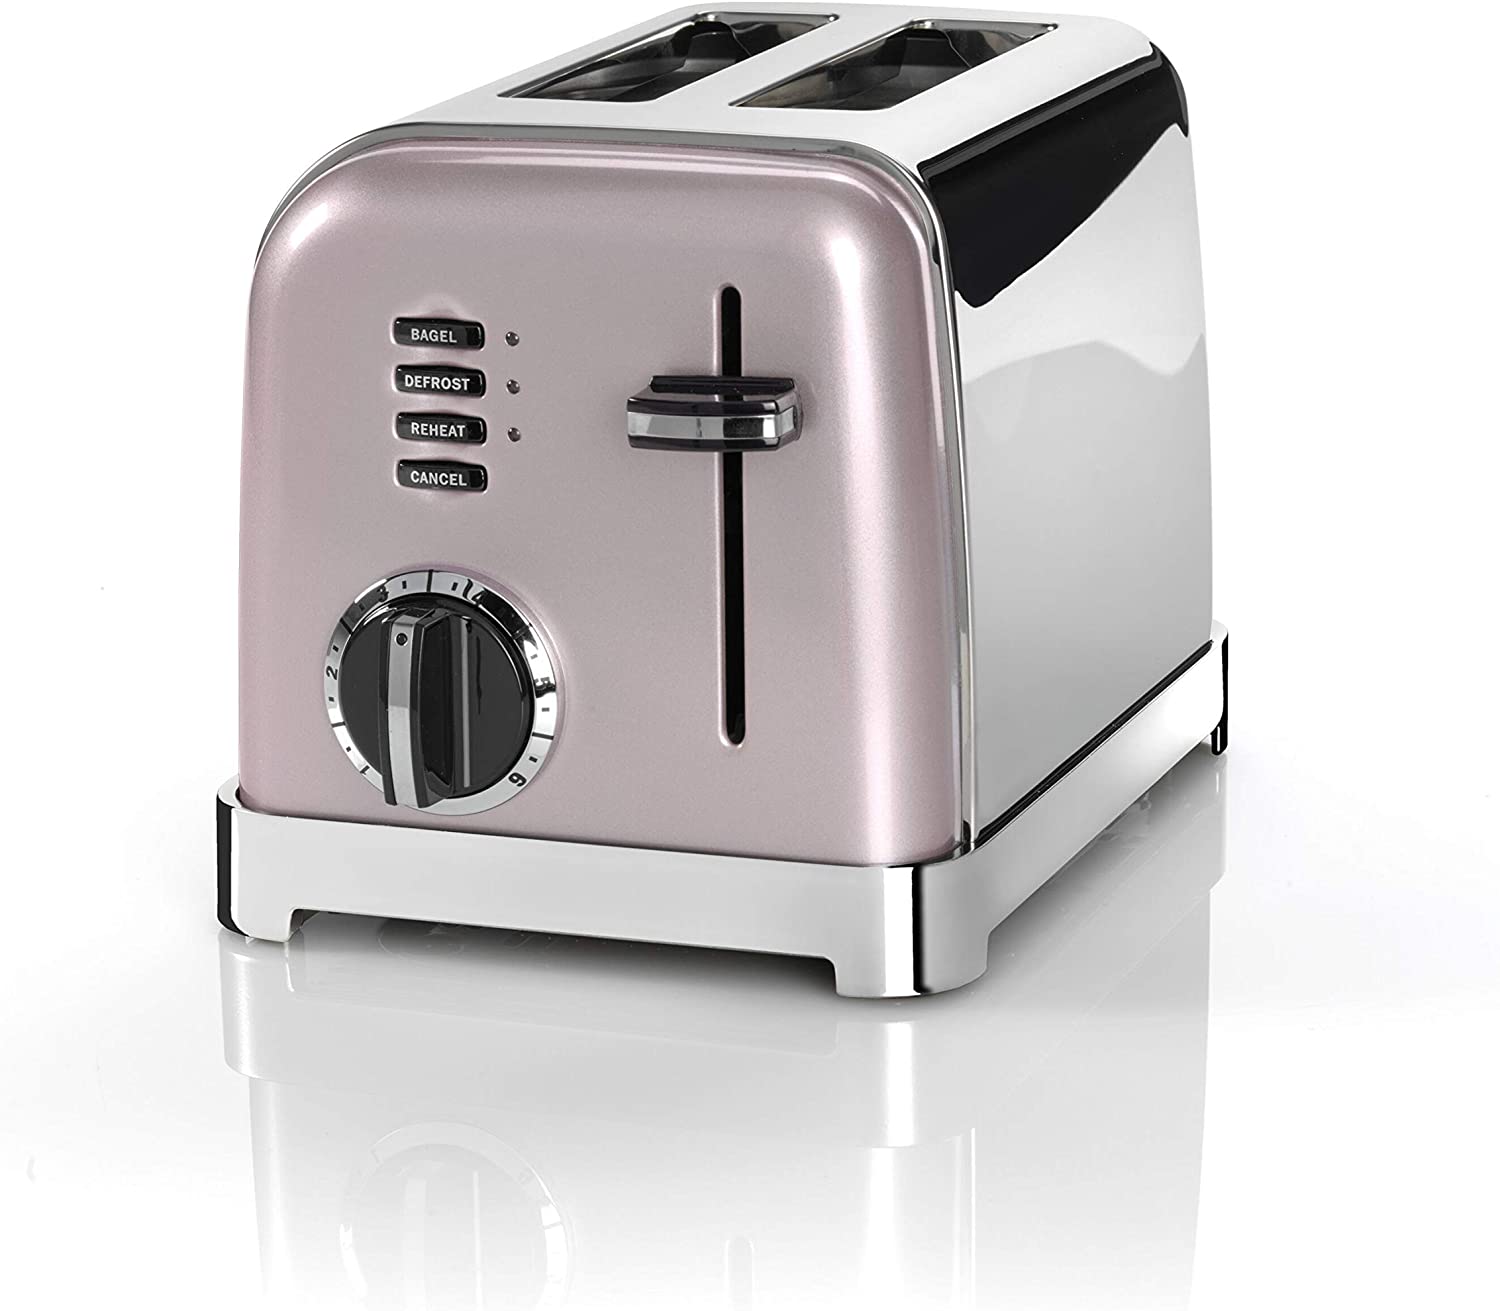 Cuisinart 2-Slot Toaster with 6 Browning Levels and Defrosting, Warm-Up and Stop Function, Extra Wide Toast Slots, Retro Design, Pink, CPT160PIE, 267